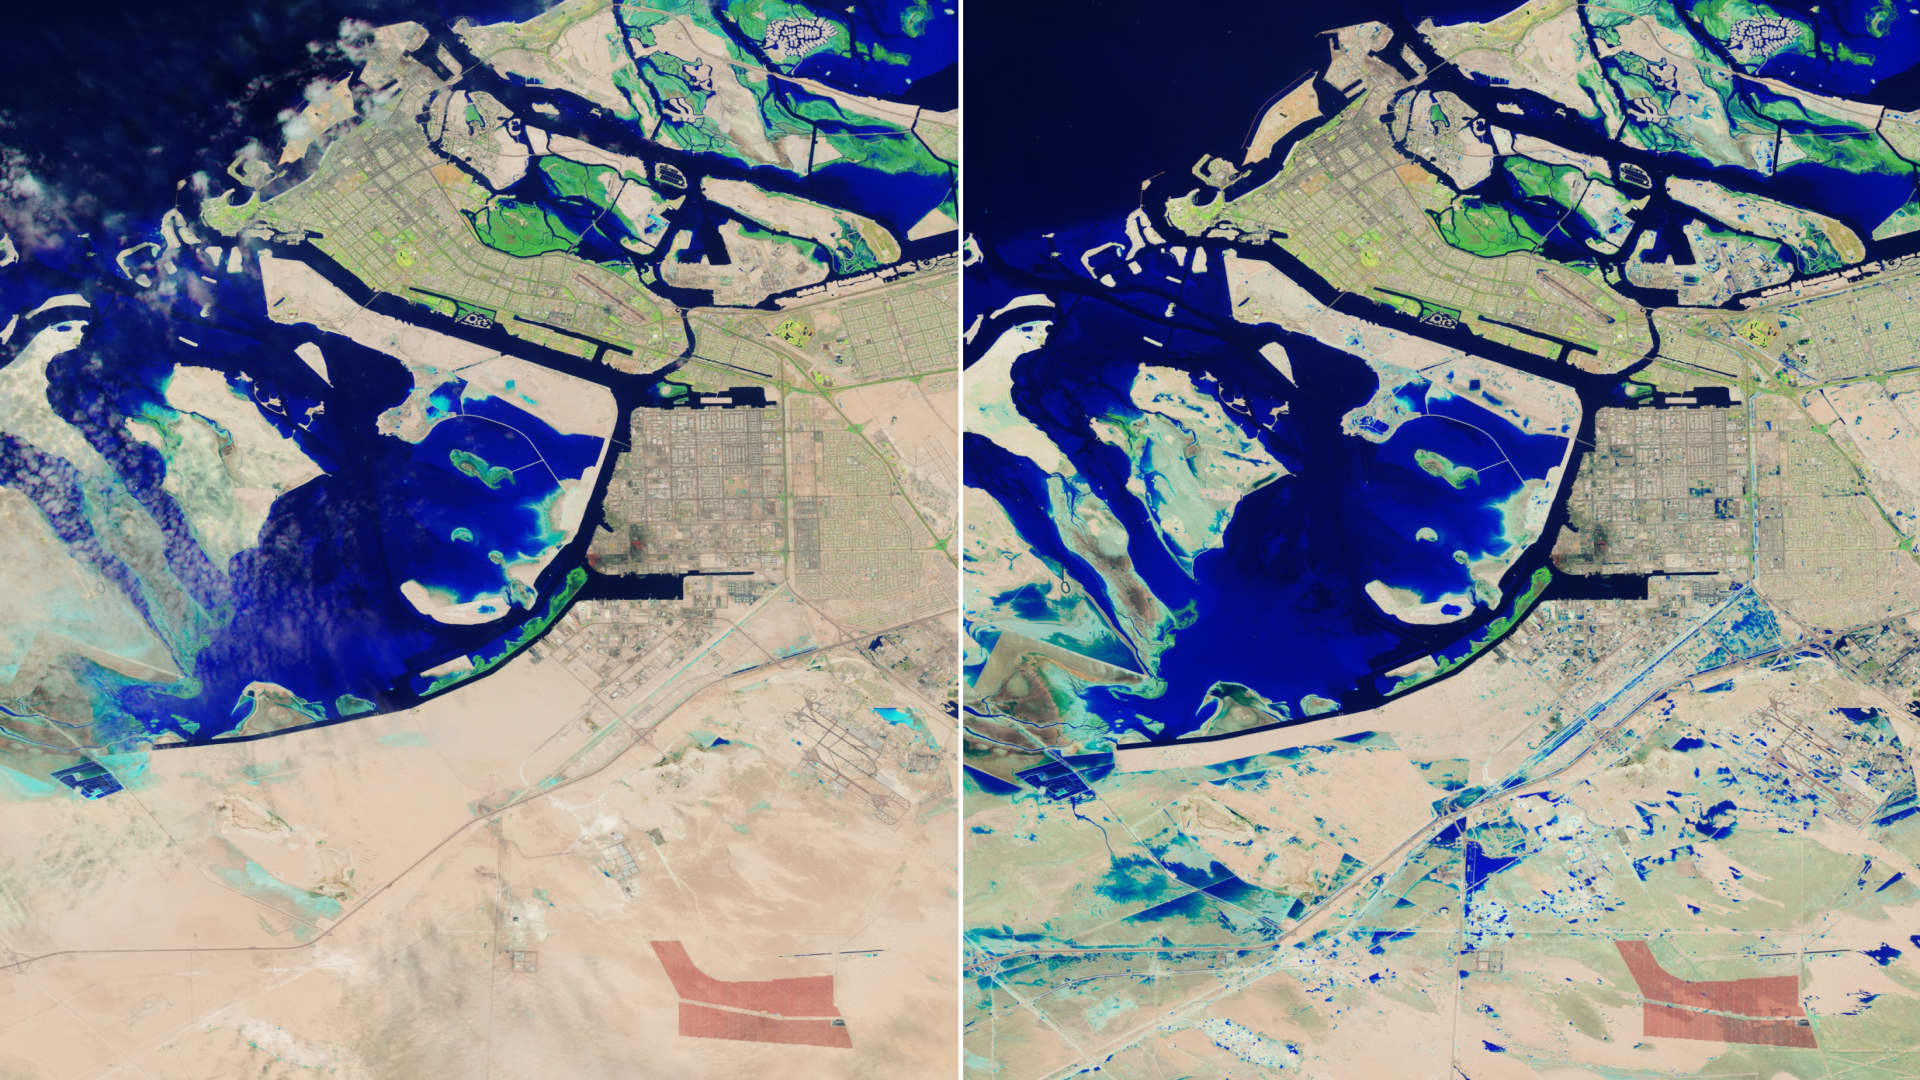 Landsat 9 images show United Arab Emirates capital Abu Dhabi and surrounding area on April 3 (left) and April 19 (right), before and after the storms. On April 19, water can be seen covering the Sheikh Zayed Road, a major thoroughfare that runs through Dubai and Abu Dhabi. Patches of flooded areas are also visible in Khalifa City and Zayed City, residential areas southeast of Abu Dhabi's downtown.